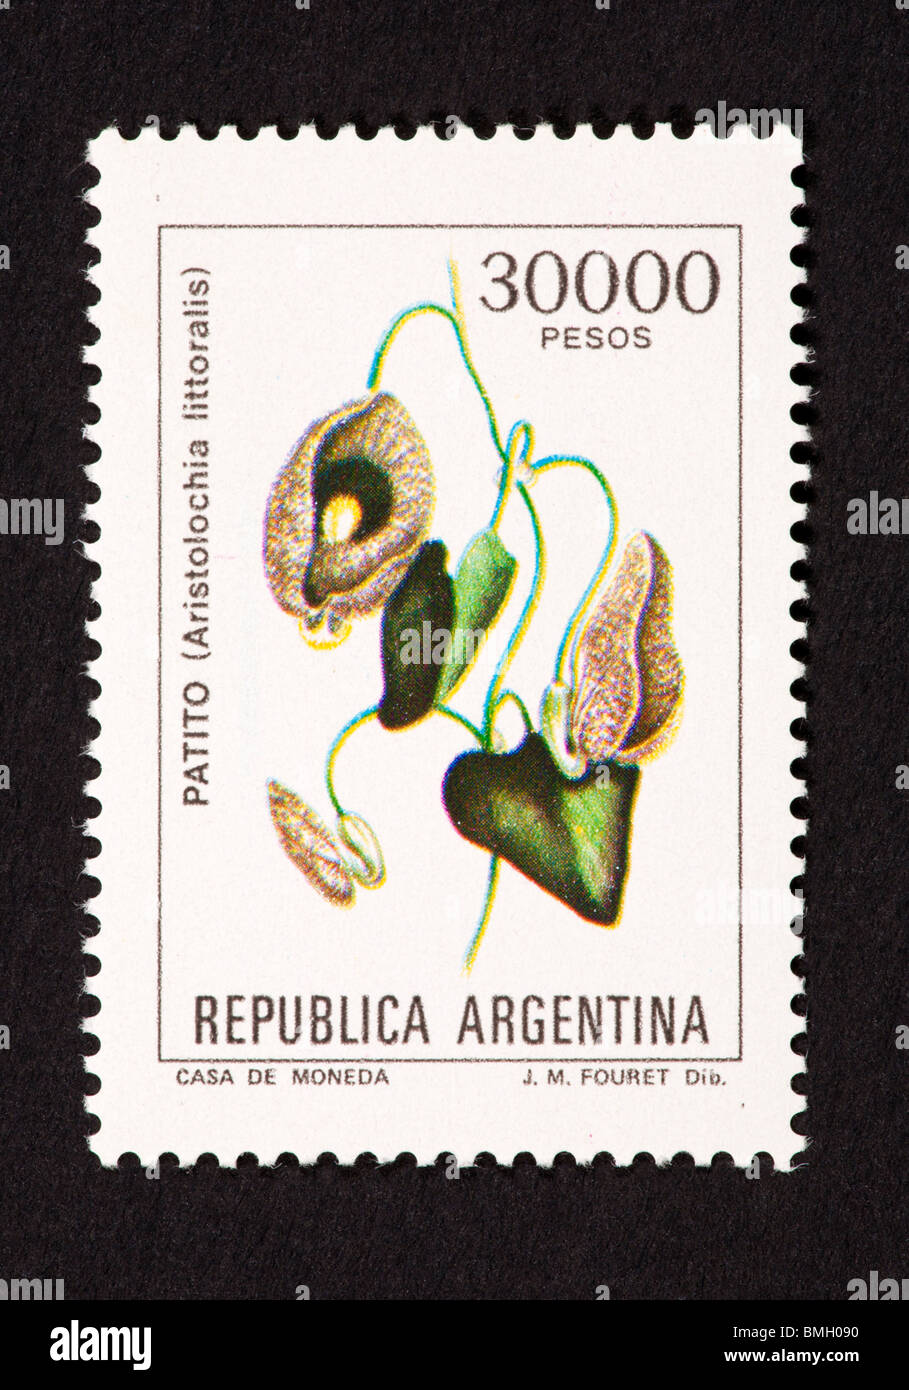 Postage stamp from Argentina depicting a flower (Aristolochia littoralis). Stock Photo